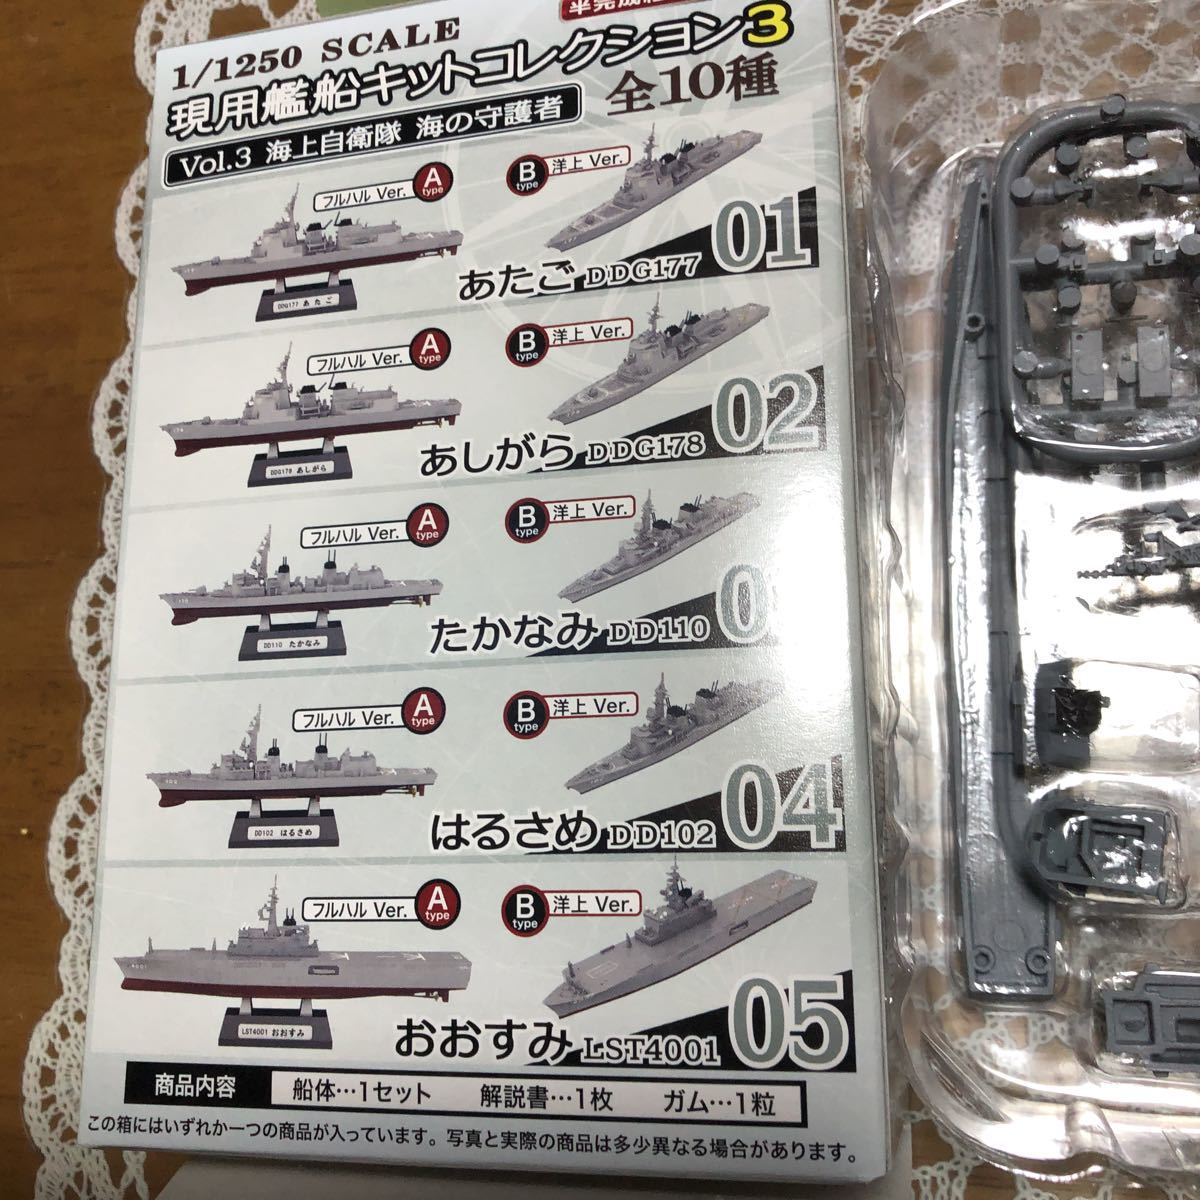  reality for . boat kit collection 3 sea on self ..DD102 is .... on Ver. 1/1250ef toys 